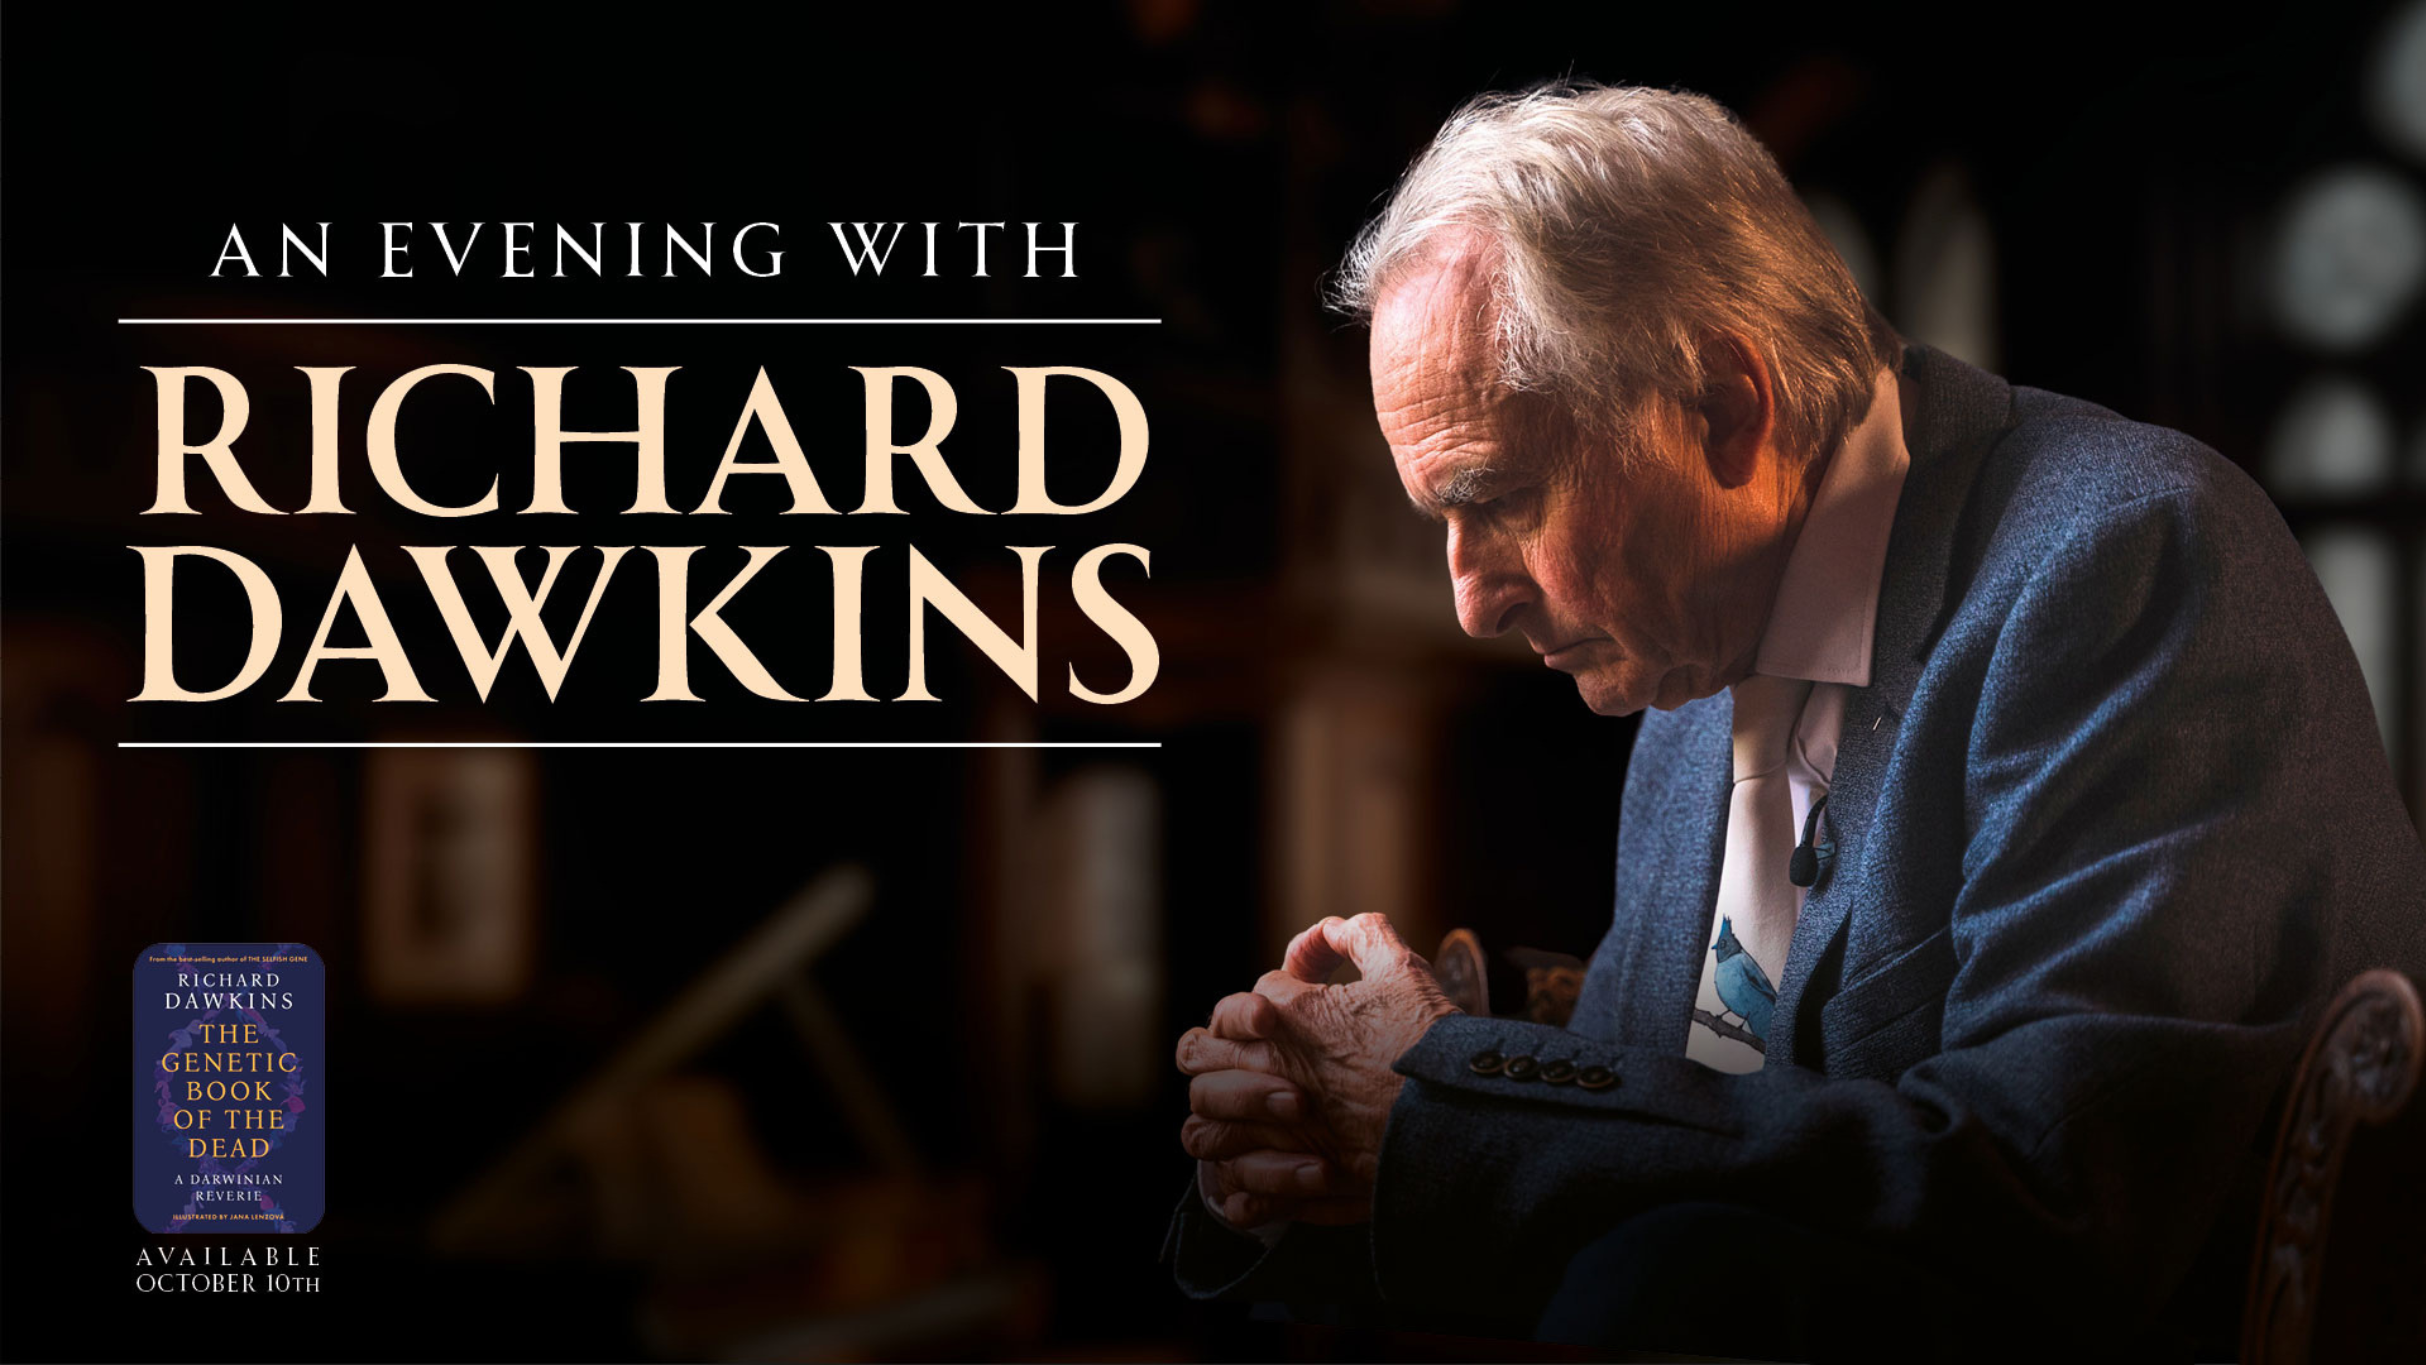 An Evening with Richard Dawkins and Friends pre-sale code for early tickets in Coventry